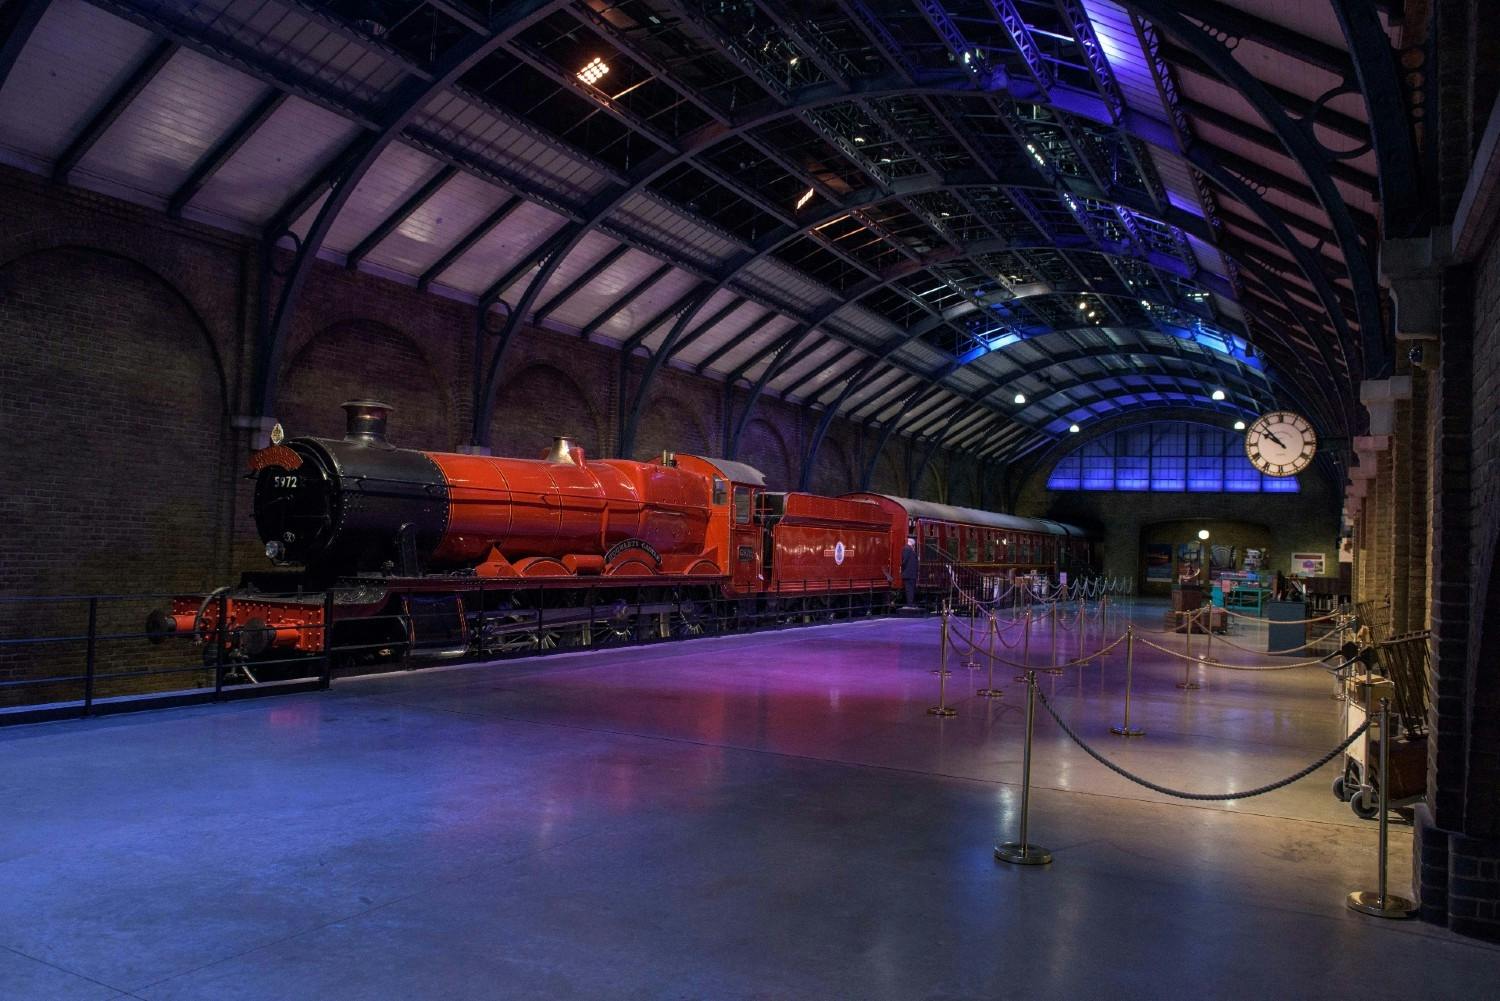 Warner Bros. Studio Tour London - The Making of Harry Potter tickets with transport